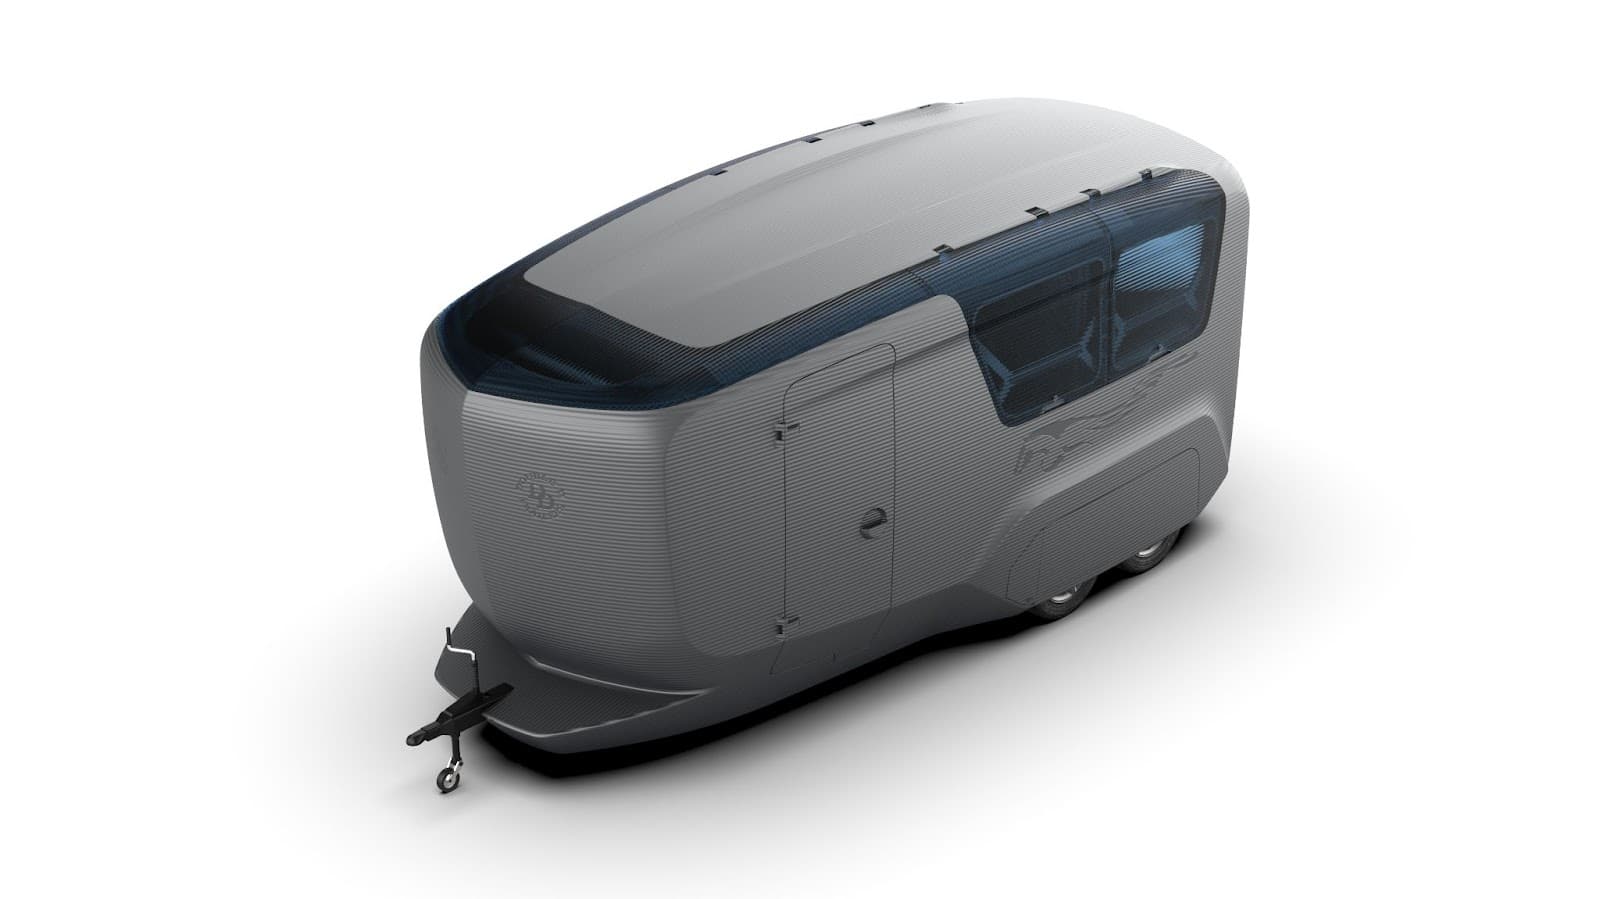 The Double D Trailers 3D horse trailer model features an aerodynamic shape.